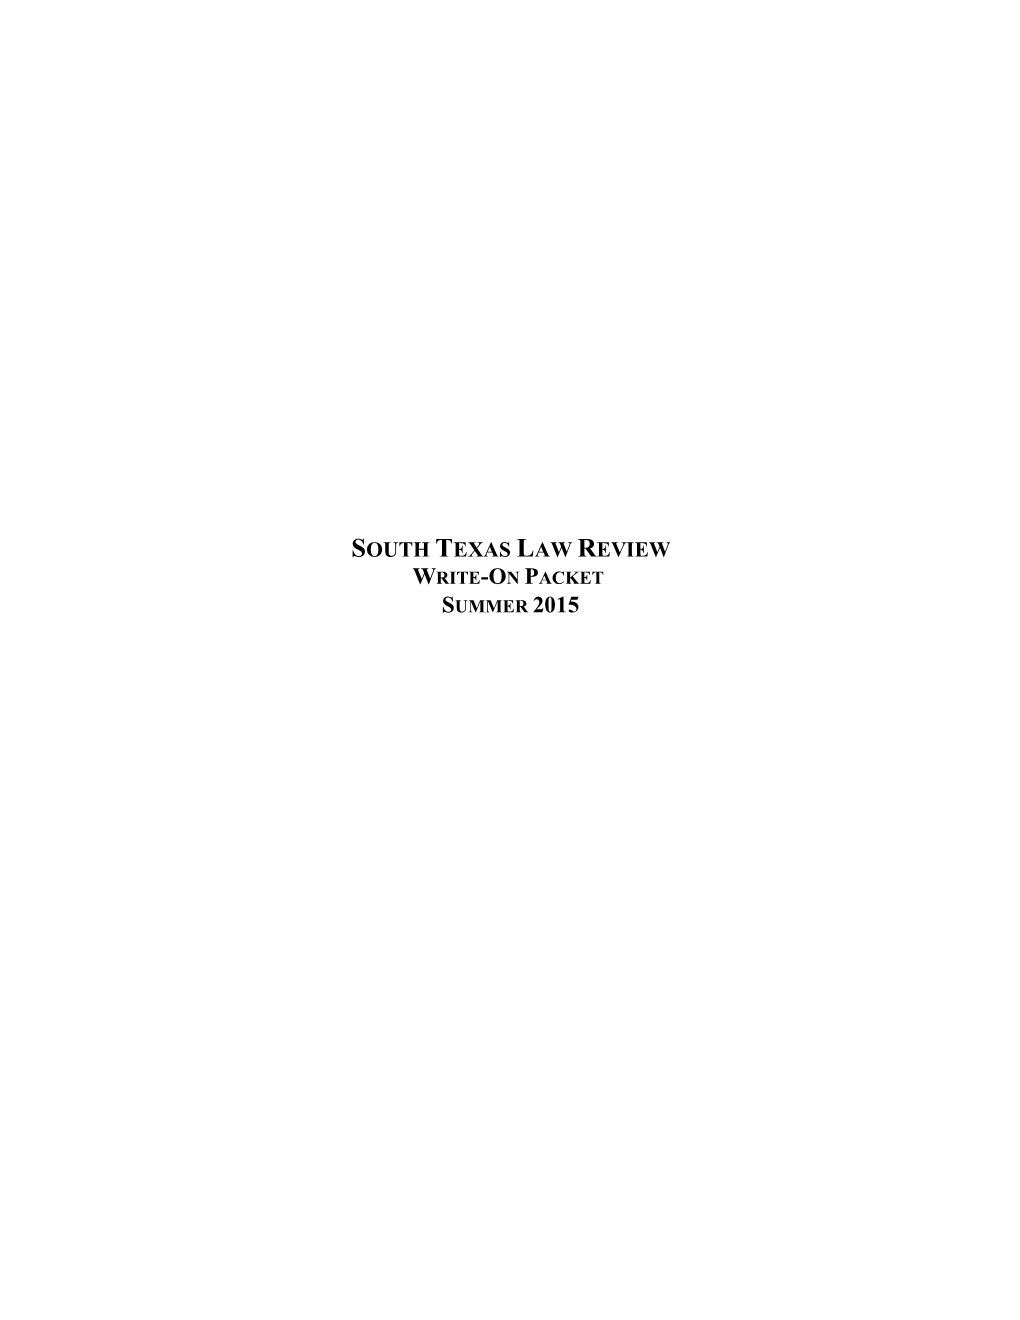 South Texas Law Review Write-On Packet Summer 2014